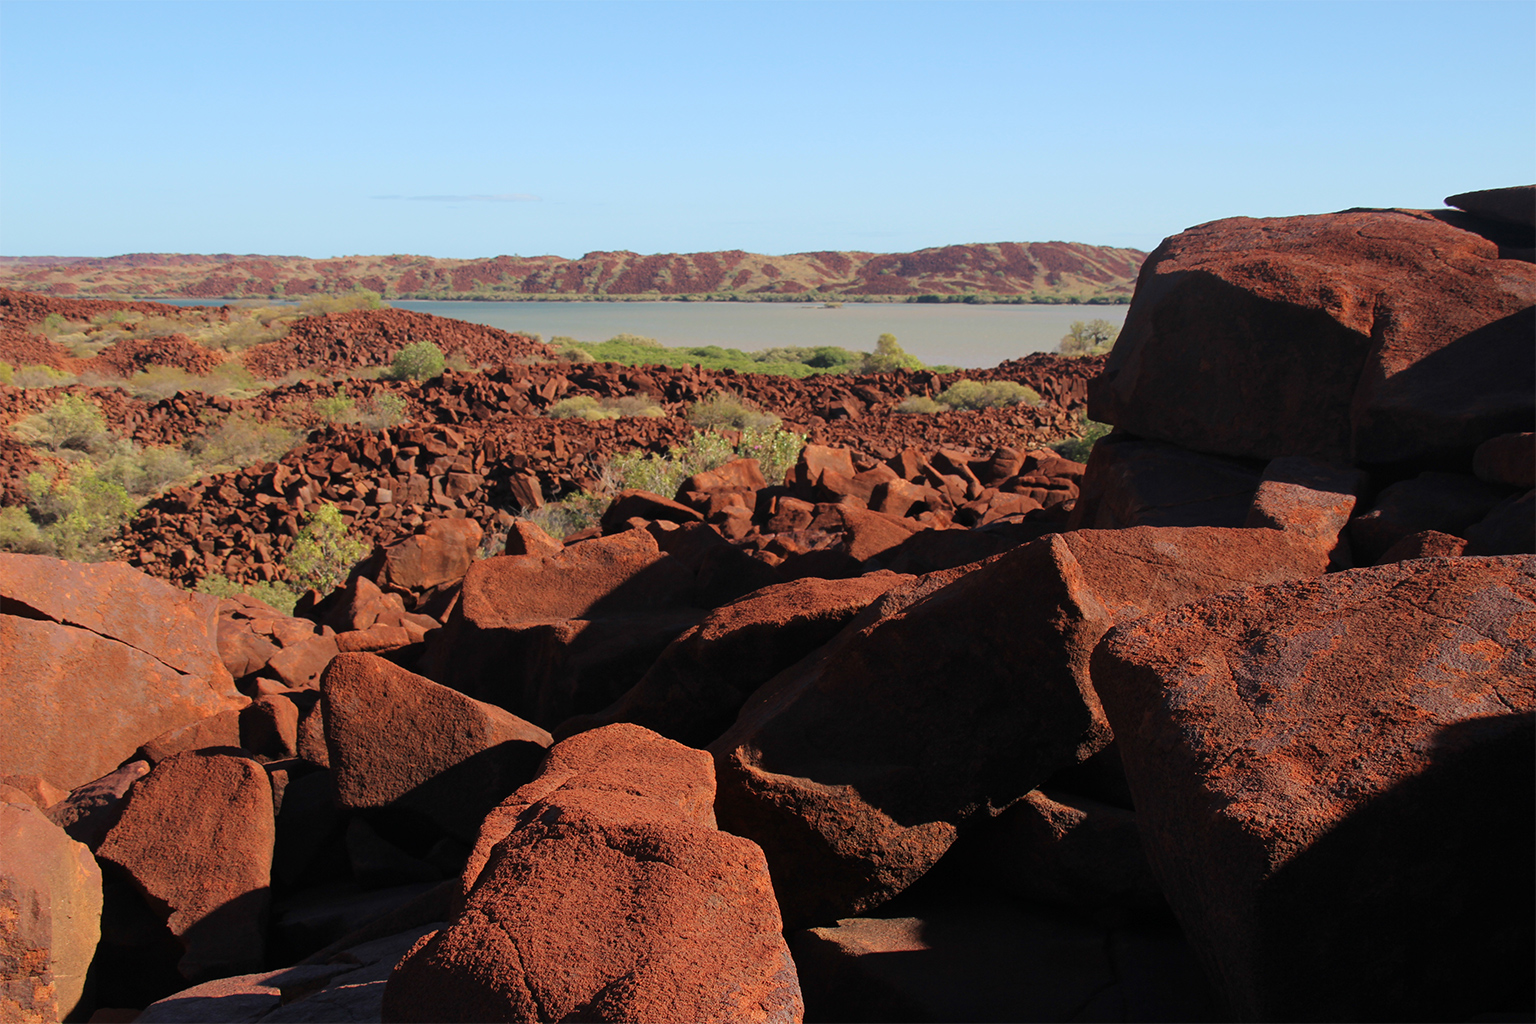 Formed billions of years ago from volcanic magma, the red rocks and hills of Murujuga arise in striking contrast to the surrounding green native grasses. 